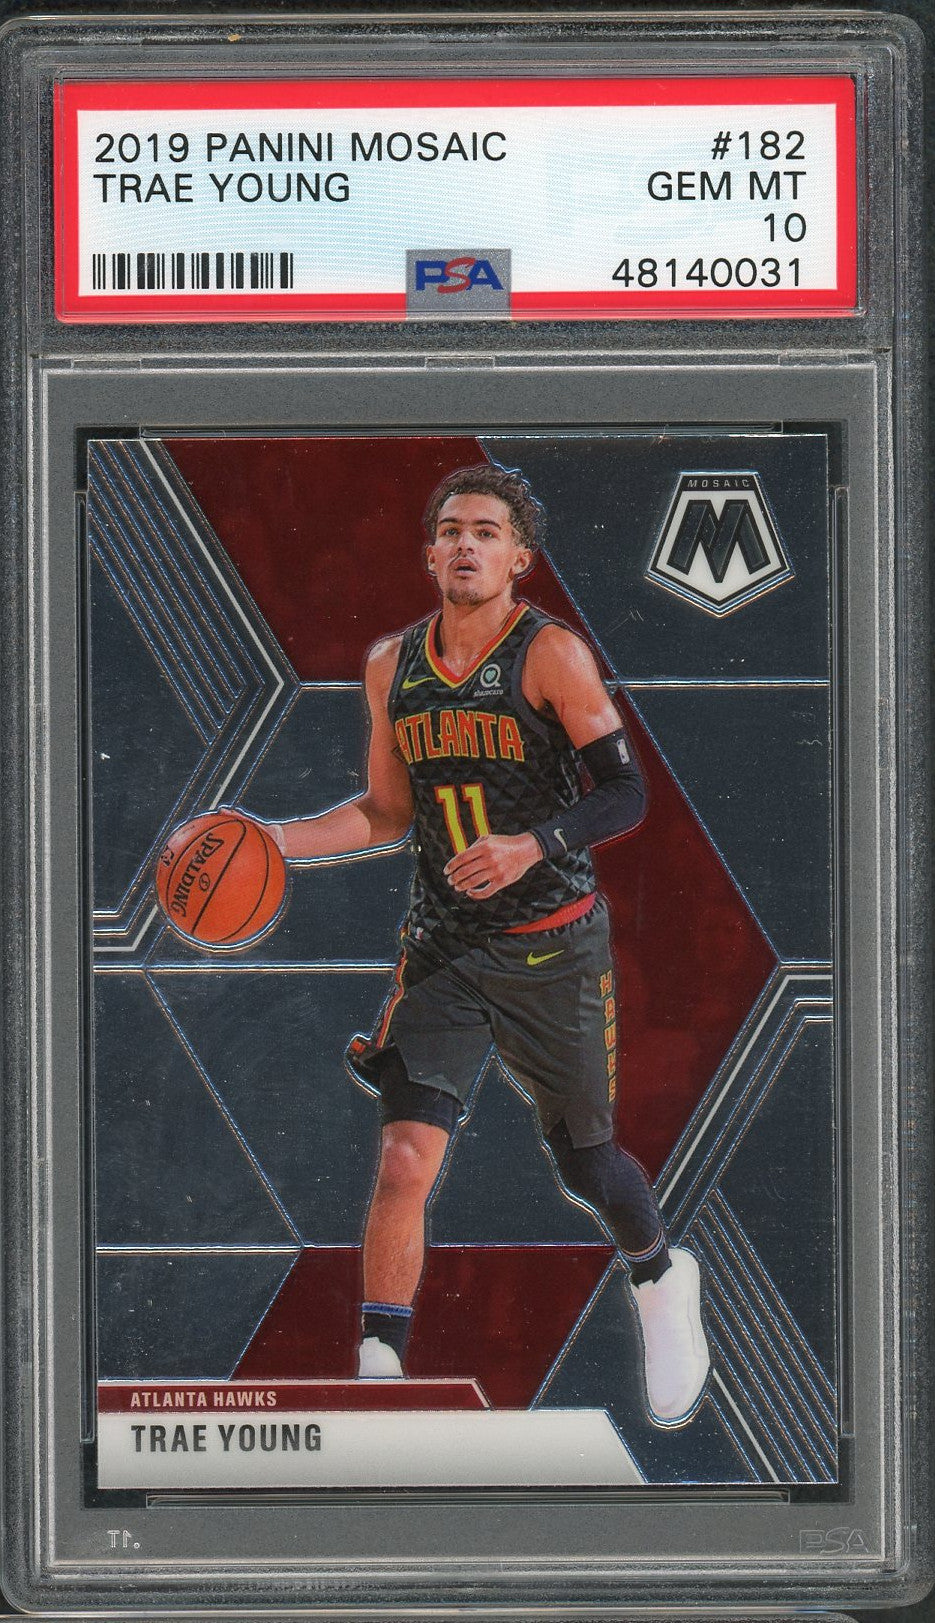 ArtStation - Trae Young Card 2019-20